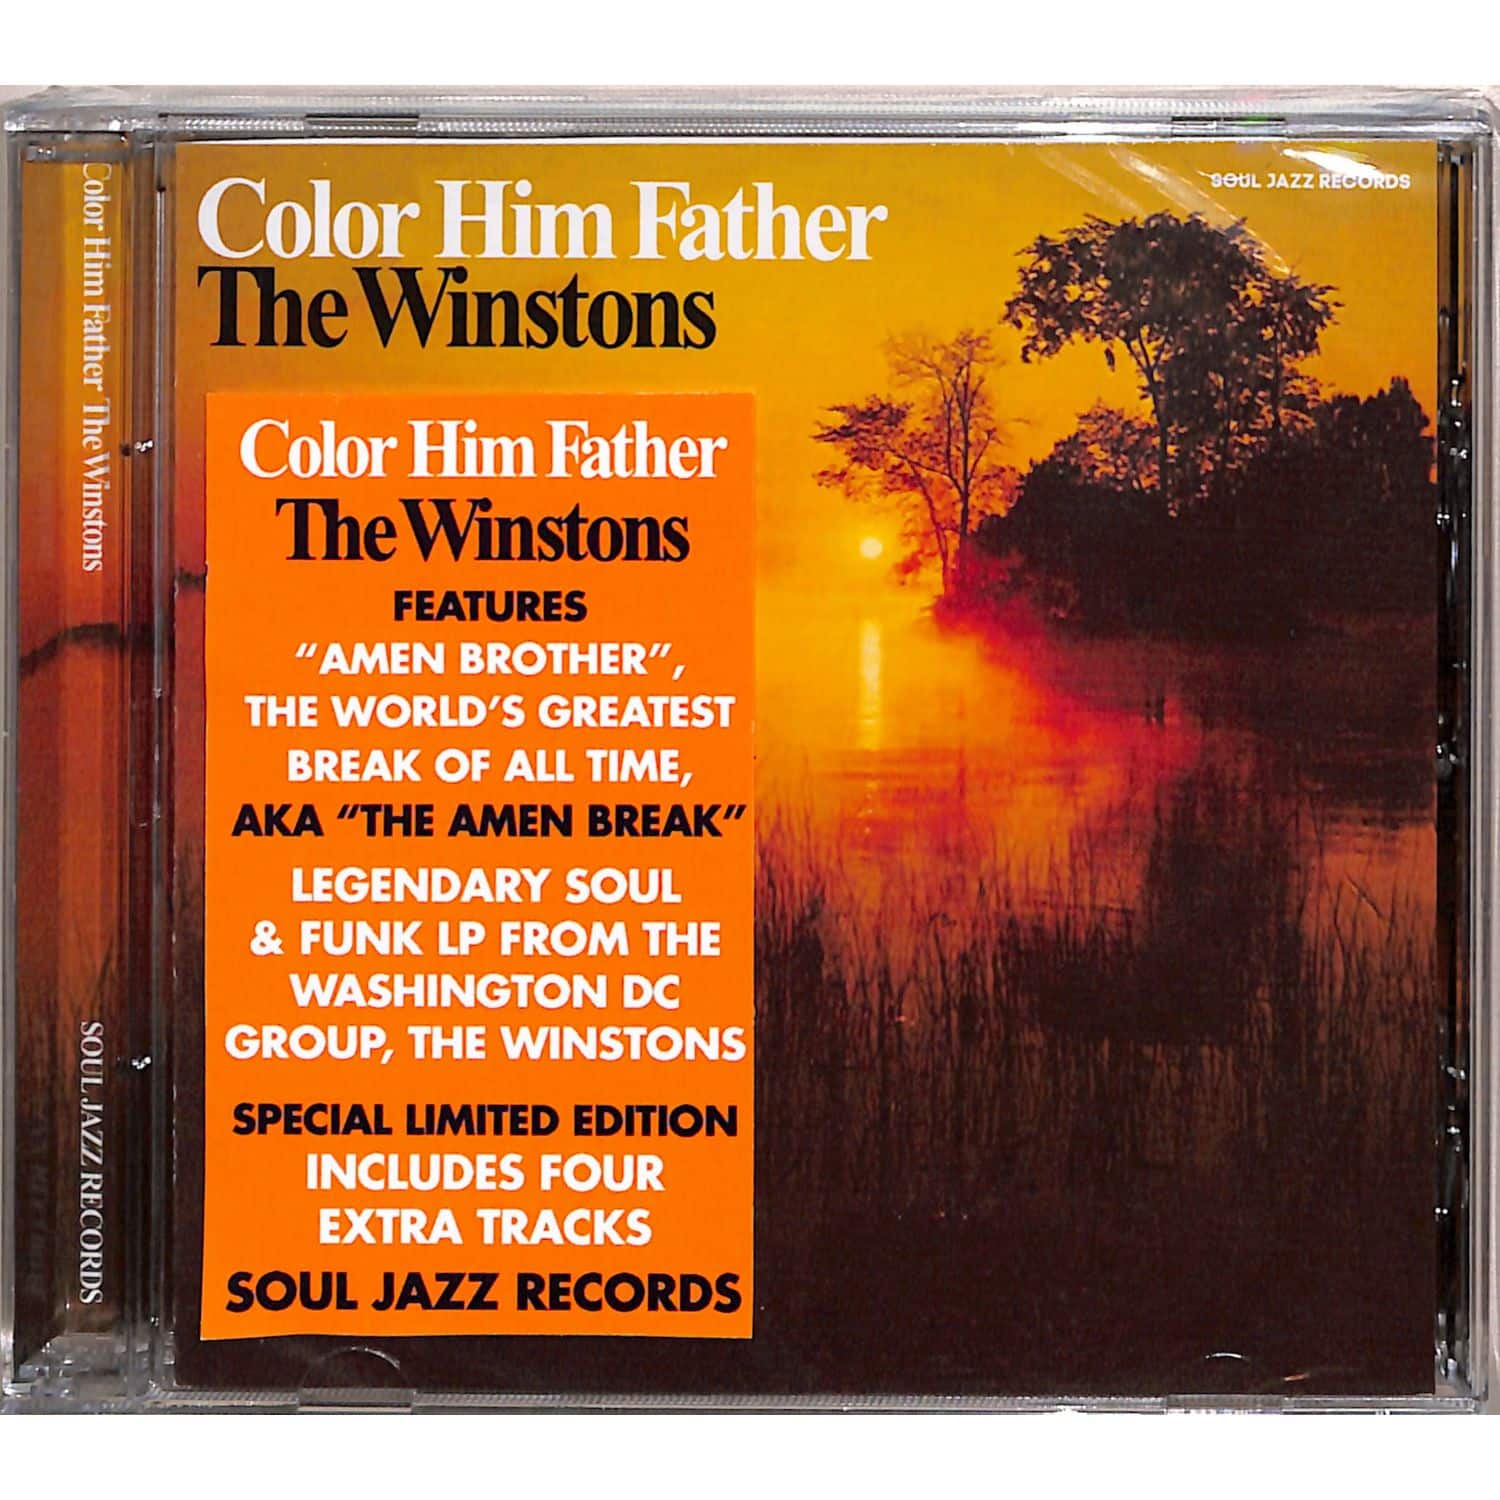 The Winstons - COLOR HIM FATHER 